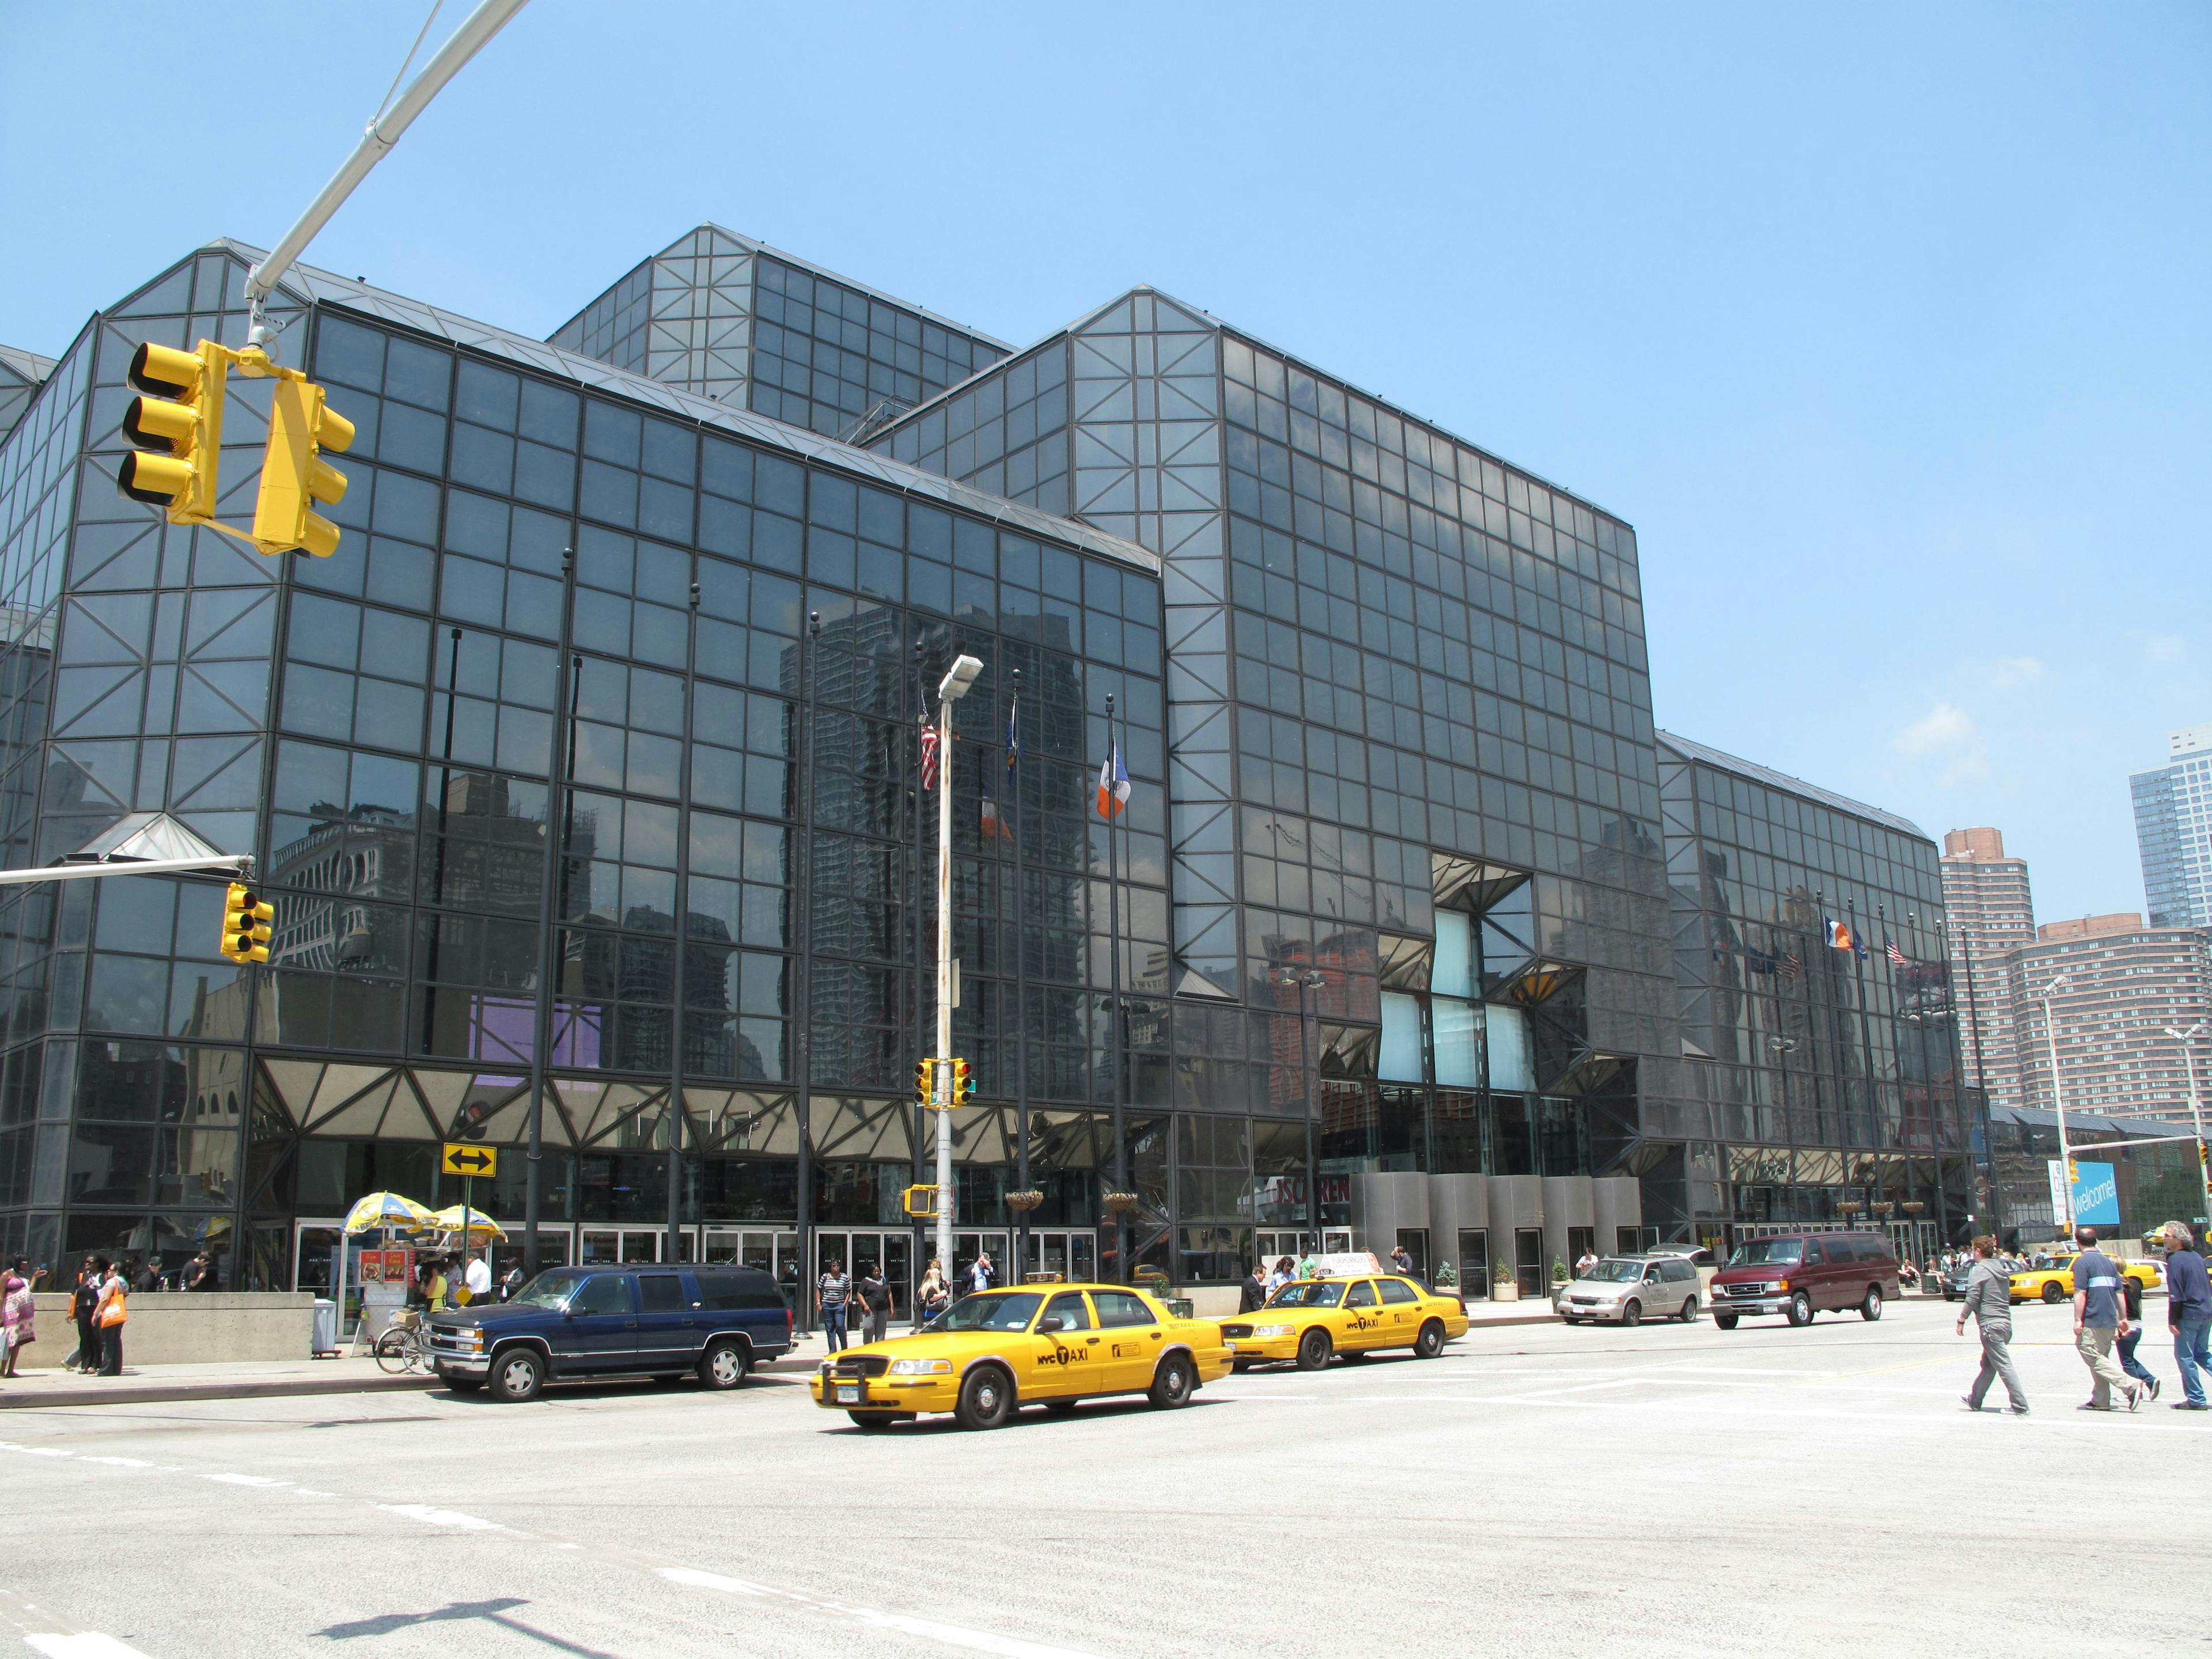 ASRS 2022 is being held at the Javits Center in New York. (File photo)